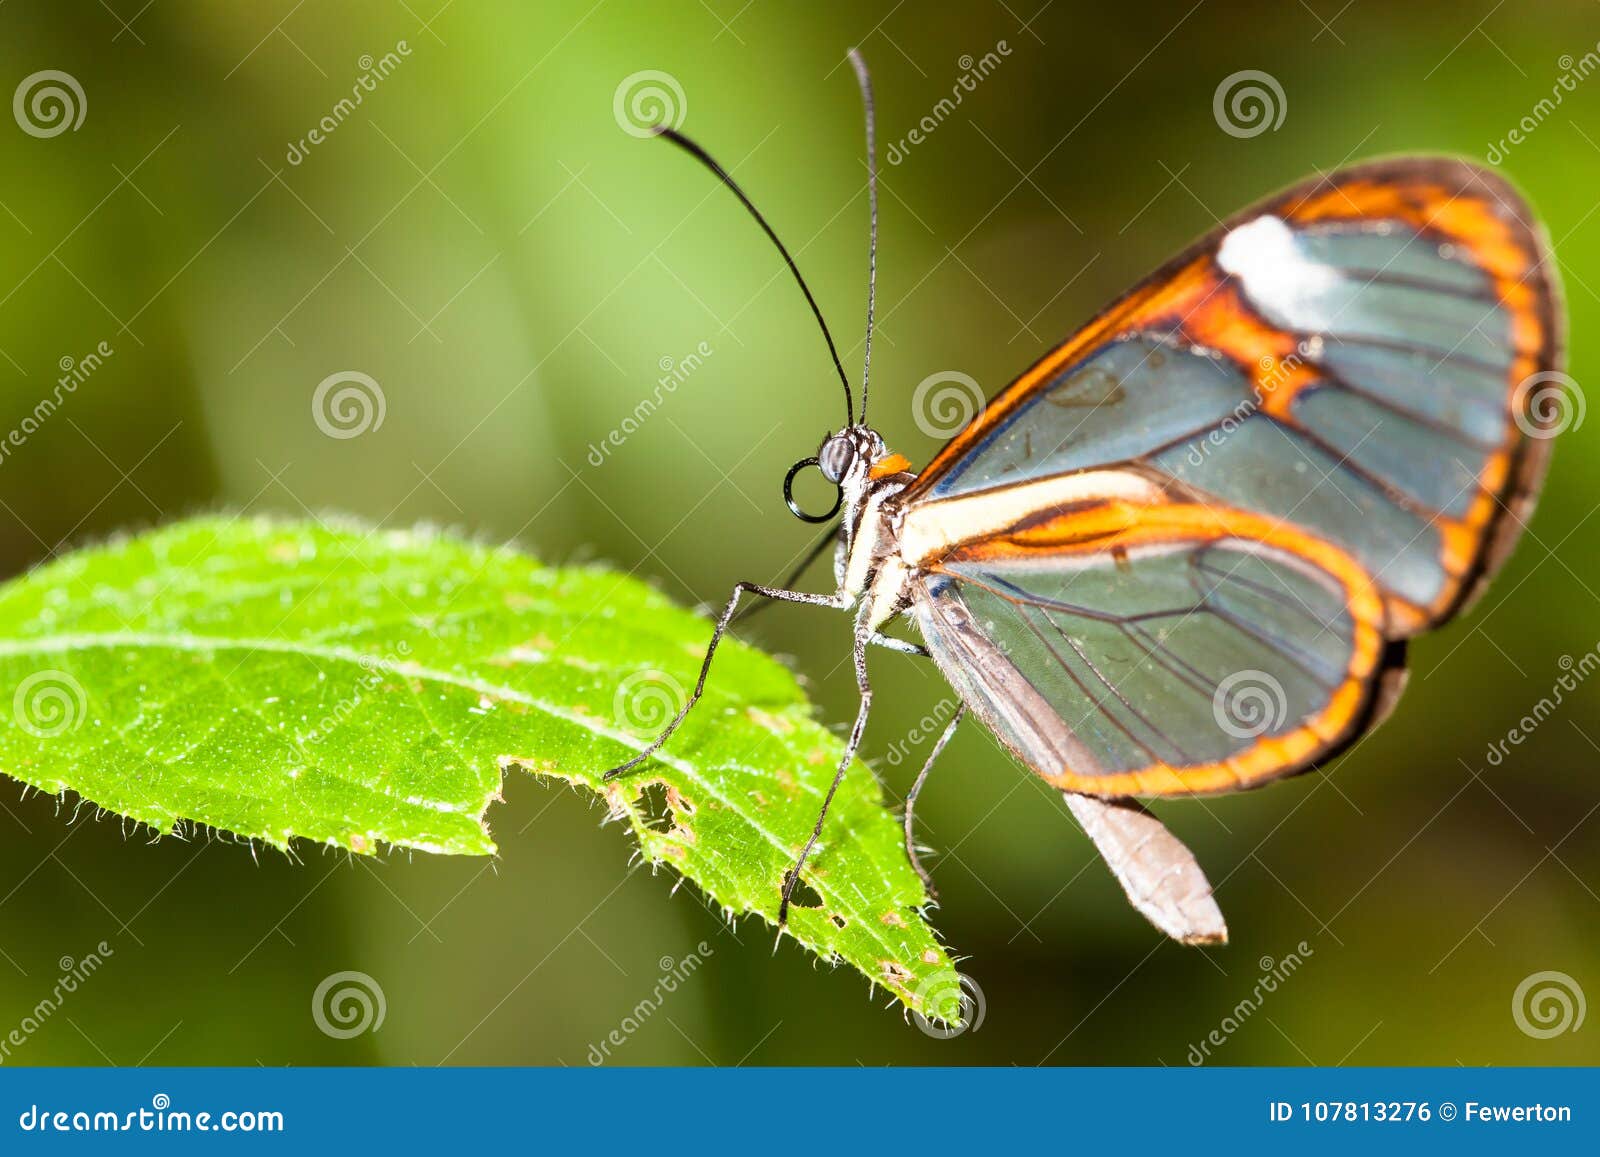 butterfly on flower. clearwing butterfly with transparent `glass` wings greta oto closeup sitting on a green leaf